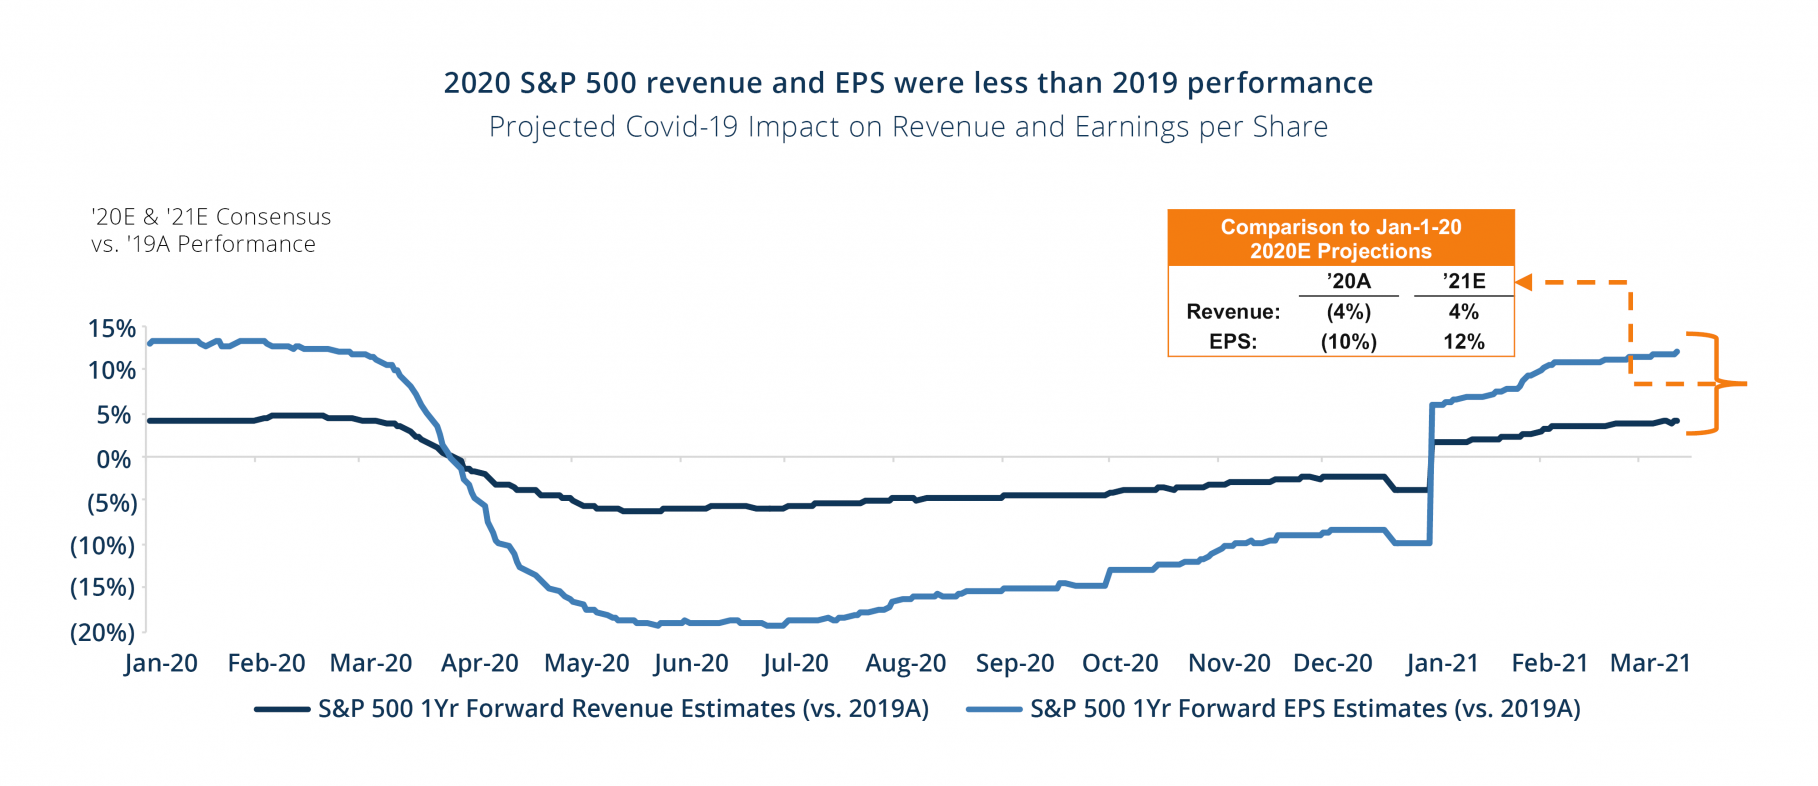 Figure 1 Projected Covid-19 Impact on Revenue and Earnings per Share